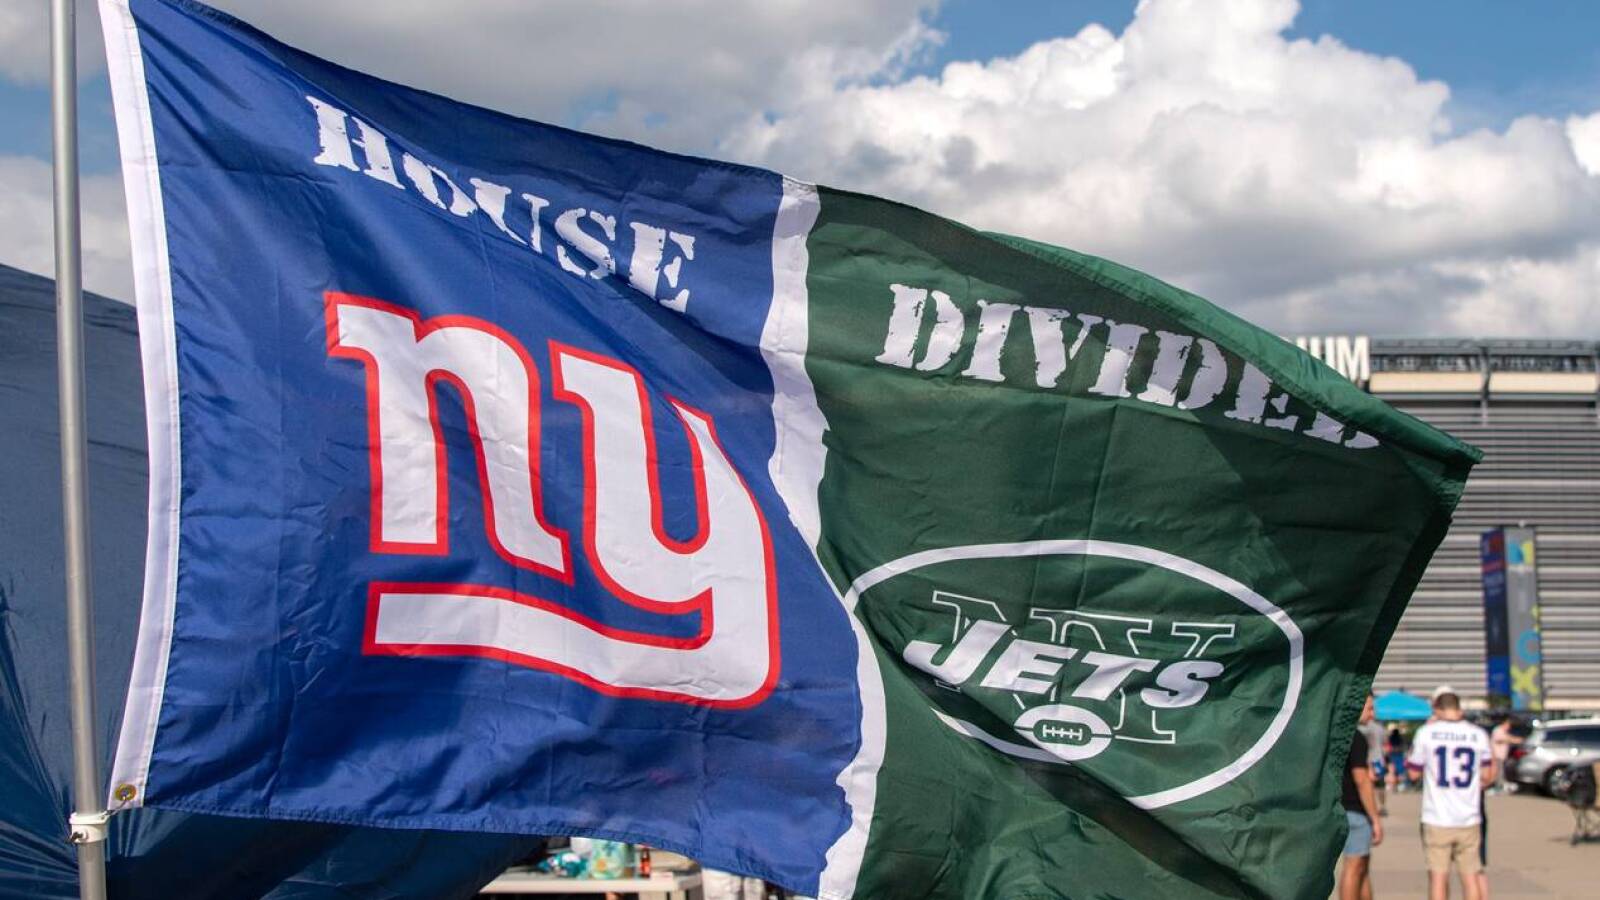 Fans demand name change in lawsuit against Giants, Jets